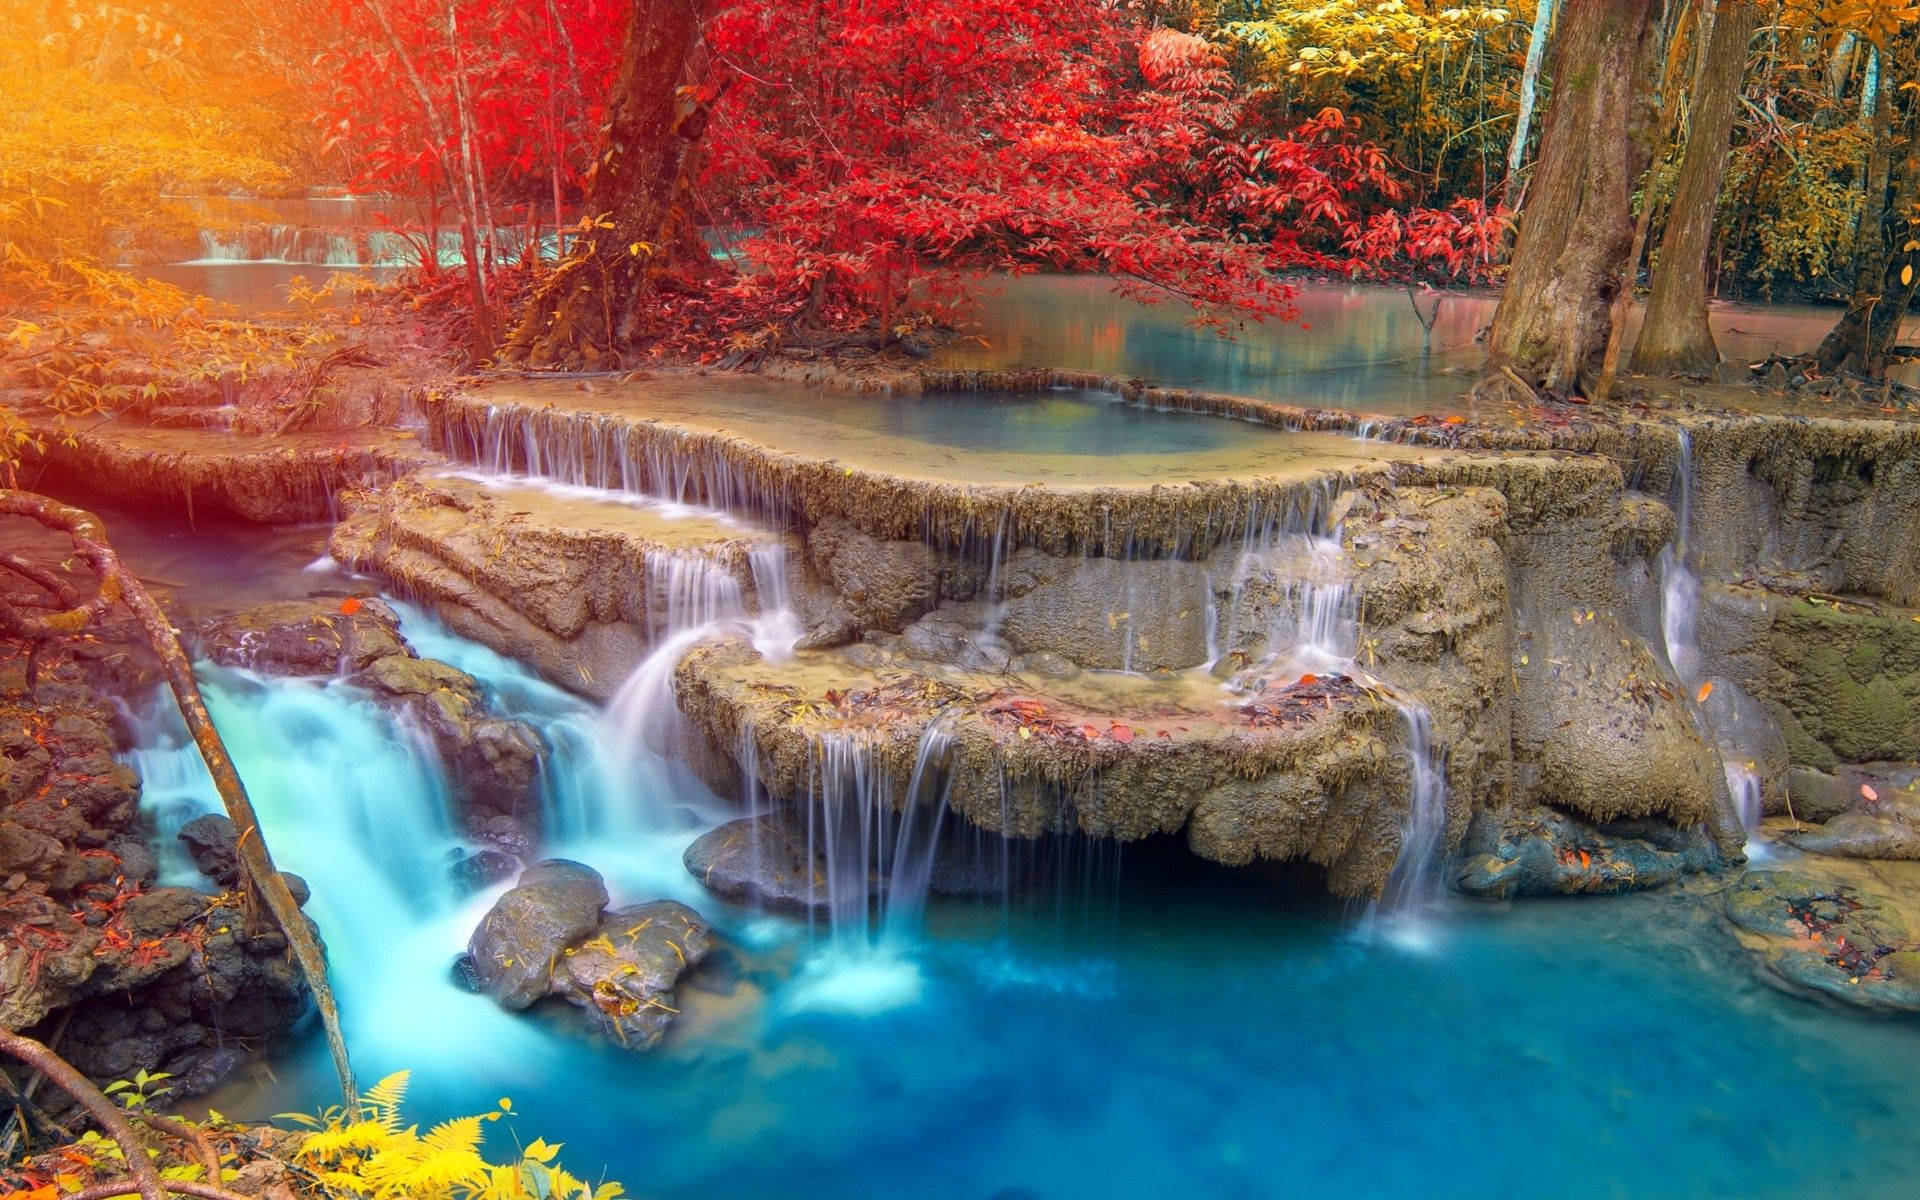 "Serenity in Nature: Beautiful Waterfall Amidst Autumn Colors" Wallpaper